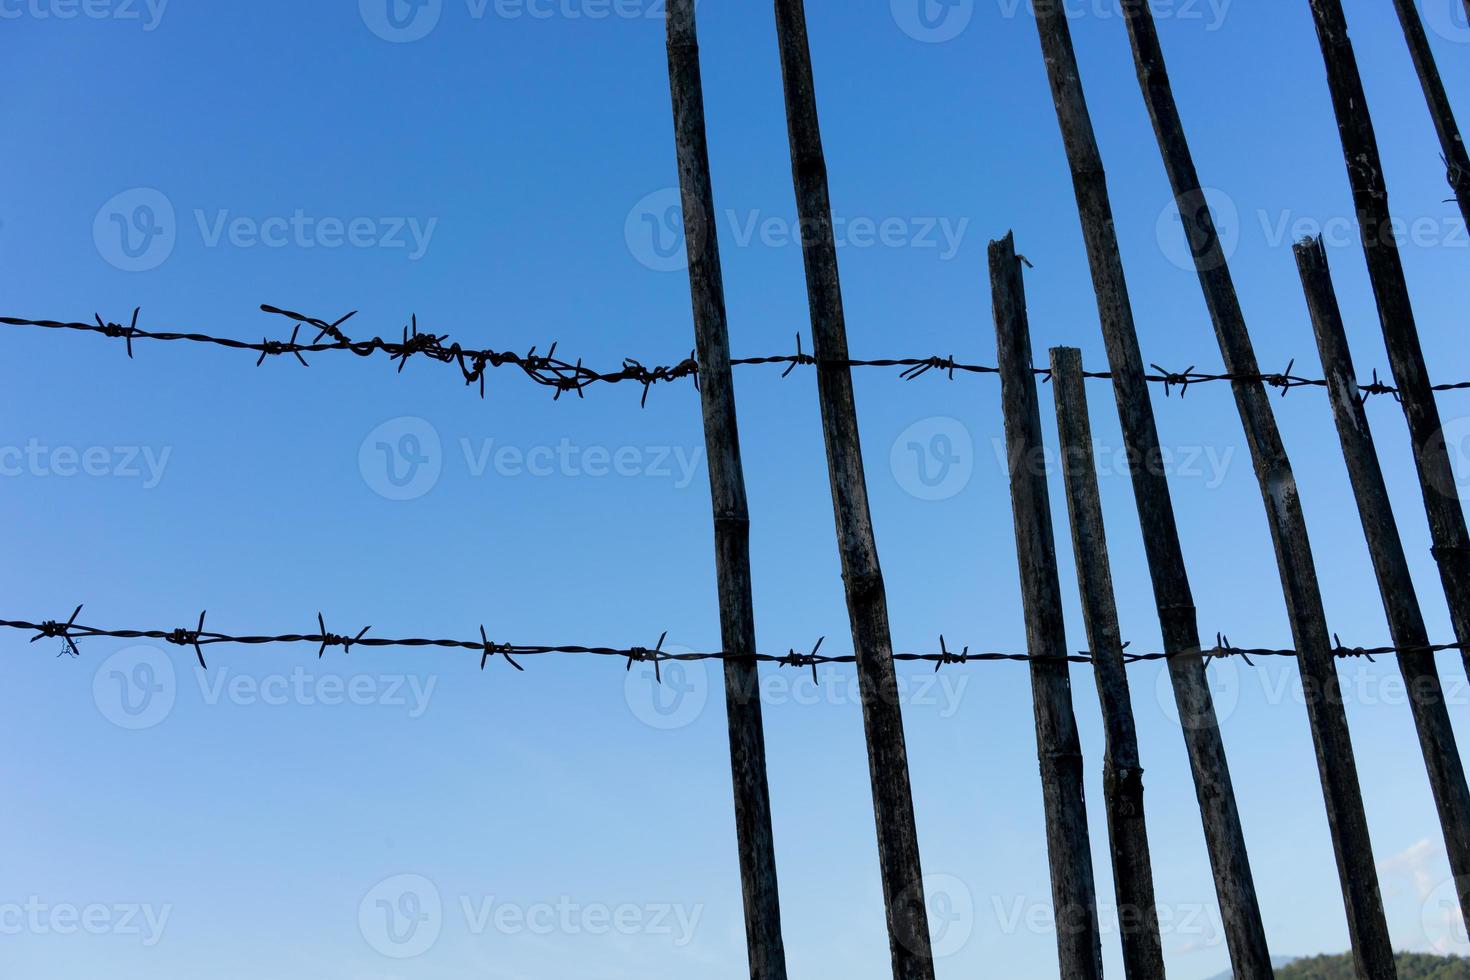 barbed wire blue sky photo